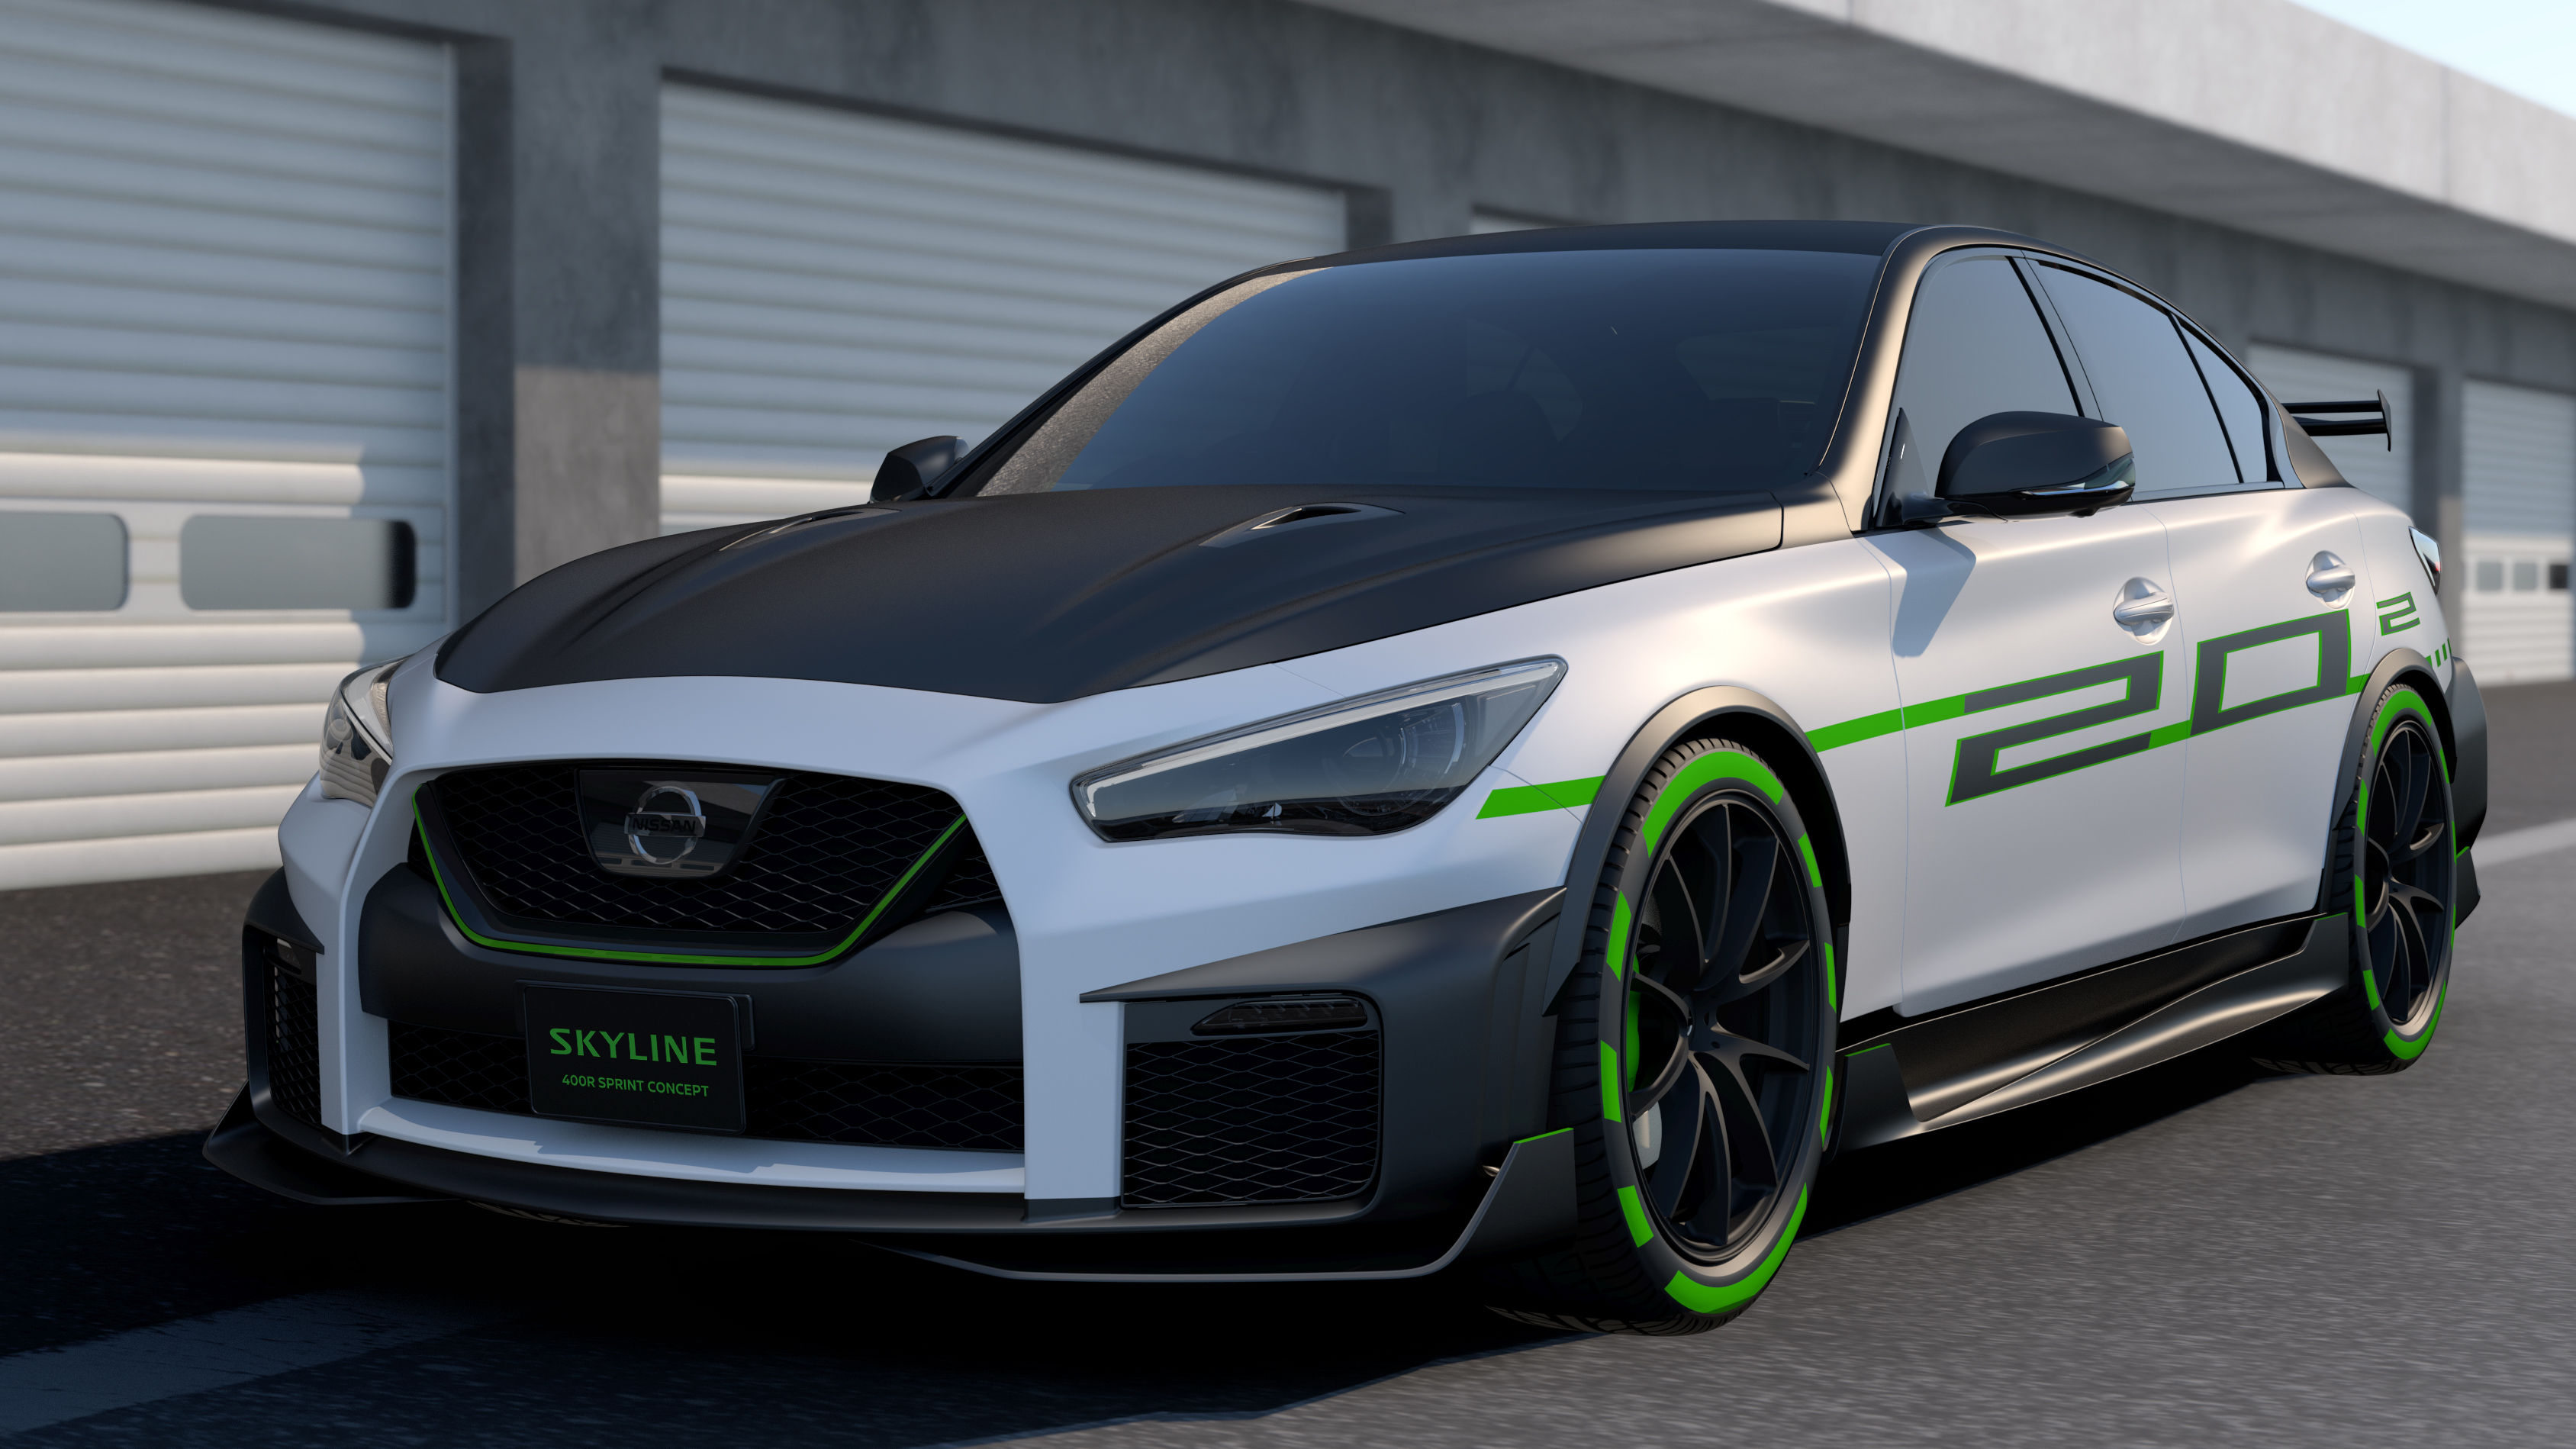 The Nissan Skyline Is Releasing TwoSpecial Editions for 2020